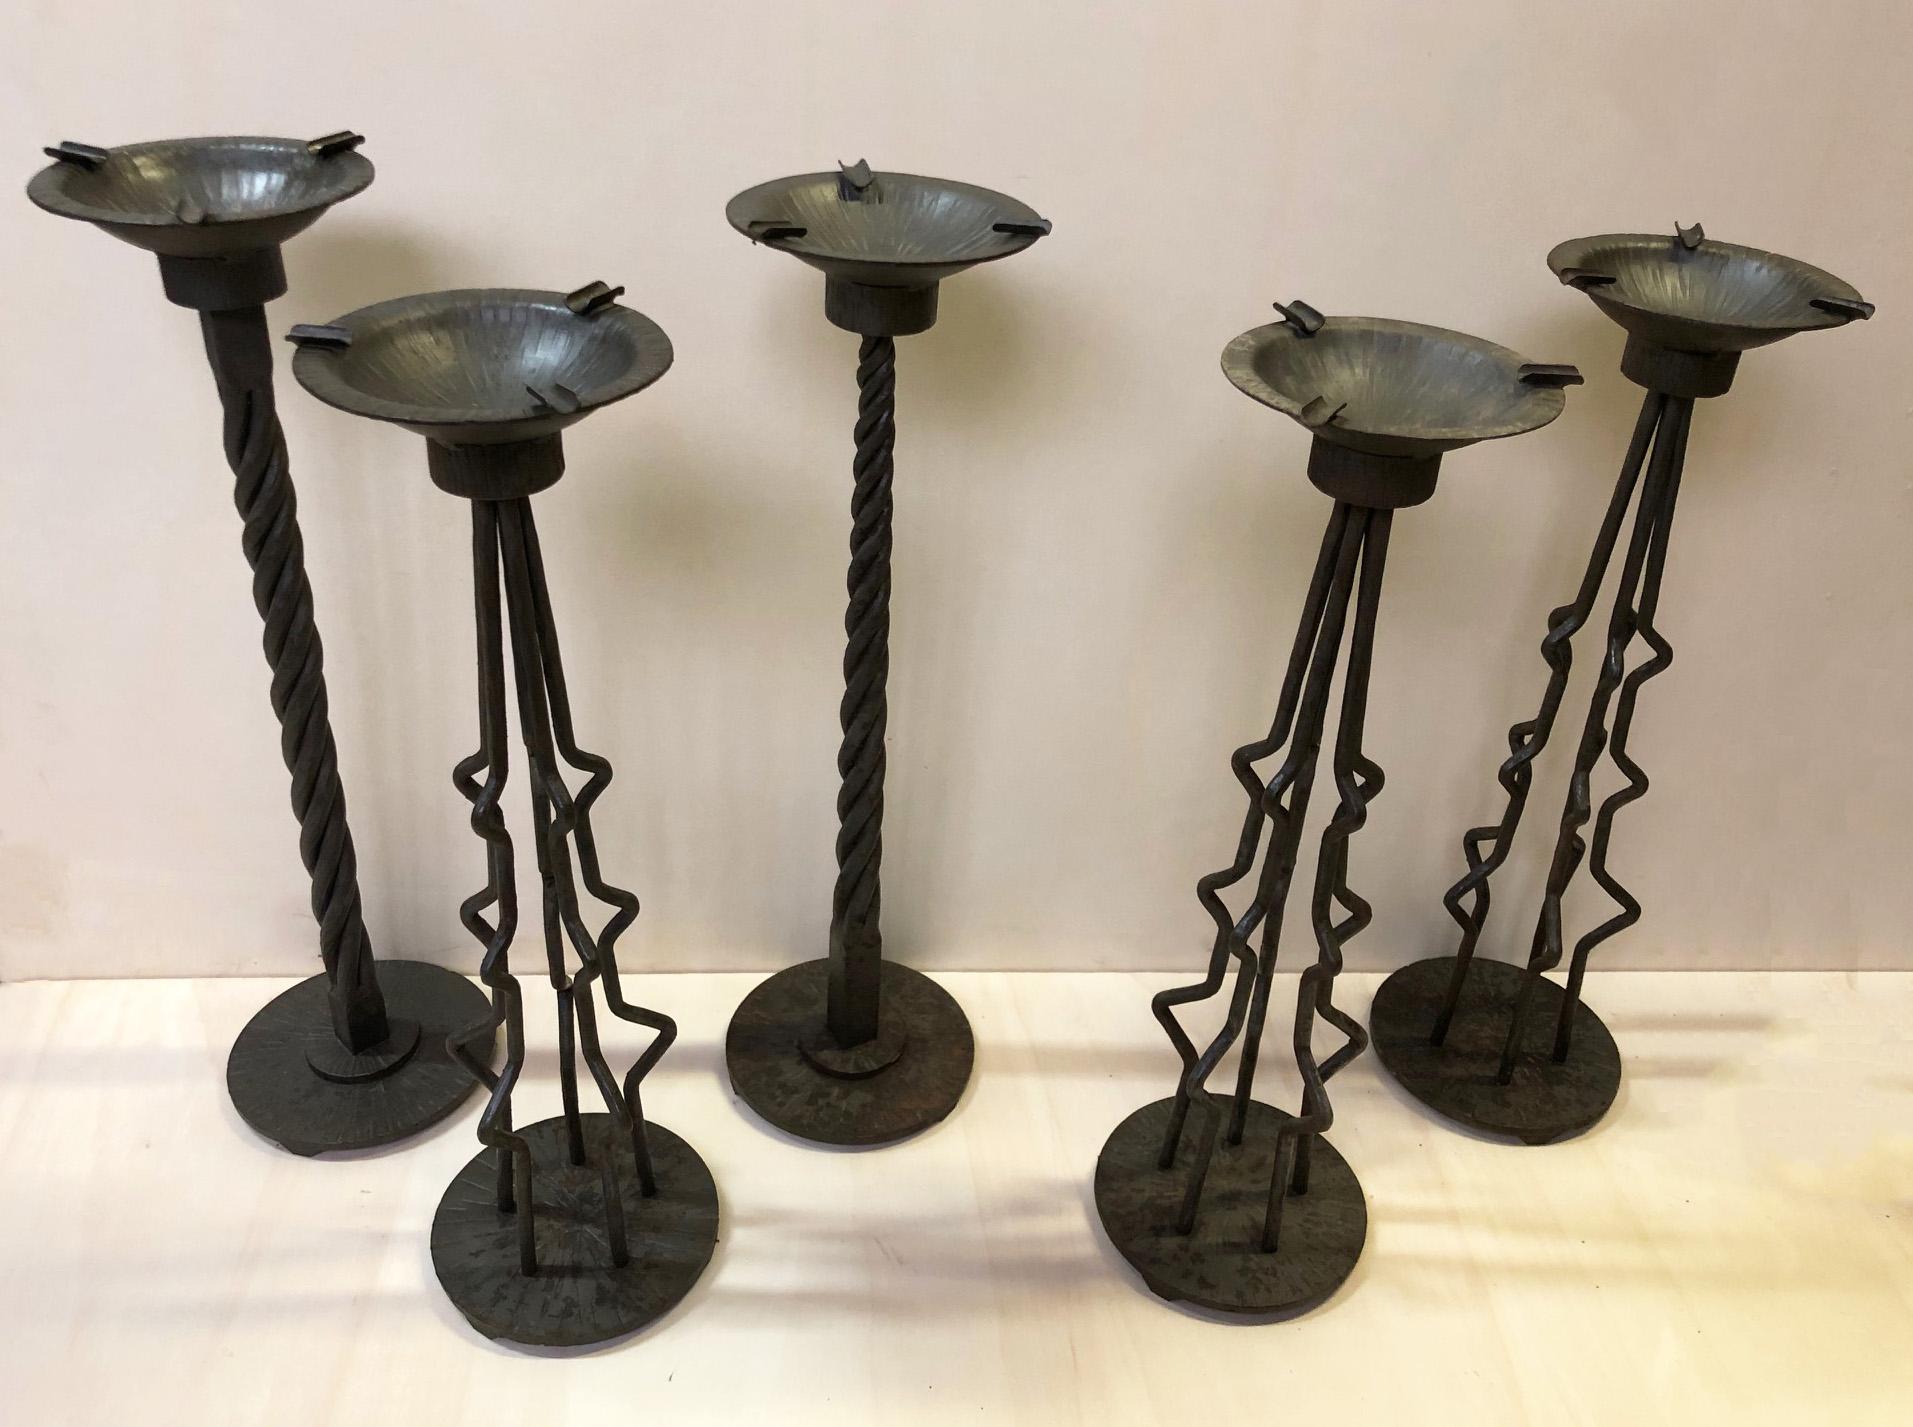 Set of five 1970s steel ashtrays oxidized iron color
There are two models of ashtray, the height goes from 64 to 66cm.
The transport quote for the USA and Canada is customized according to the destination, make the request with zip code and city.